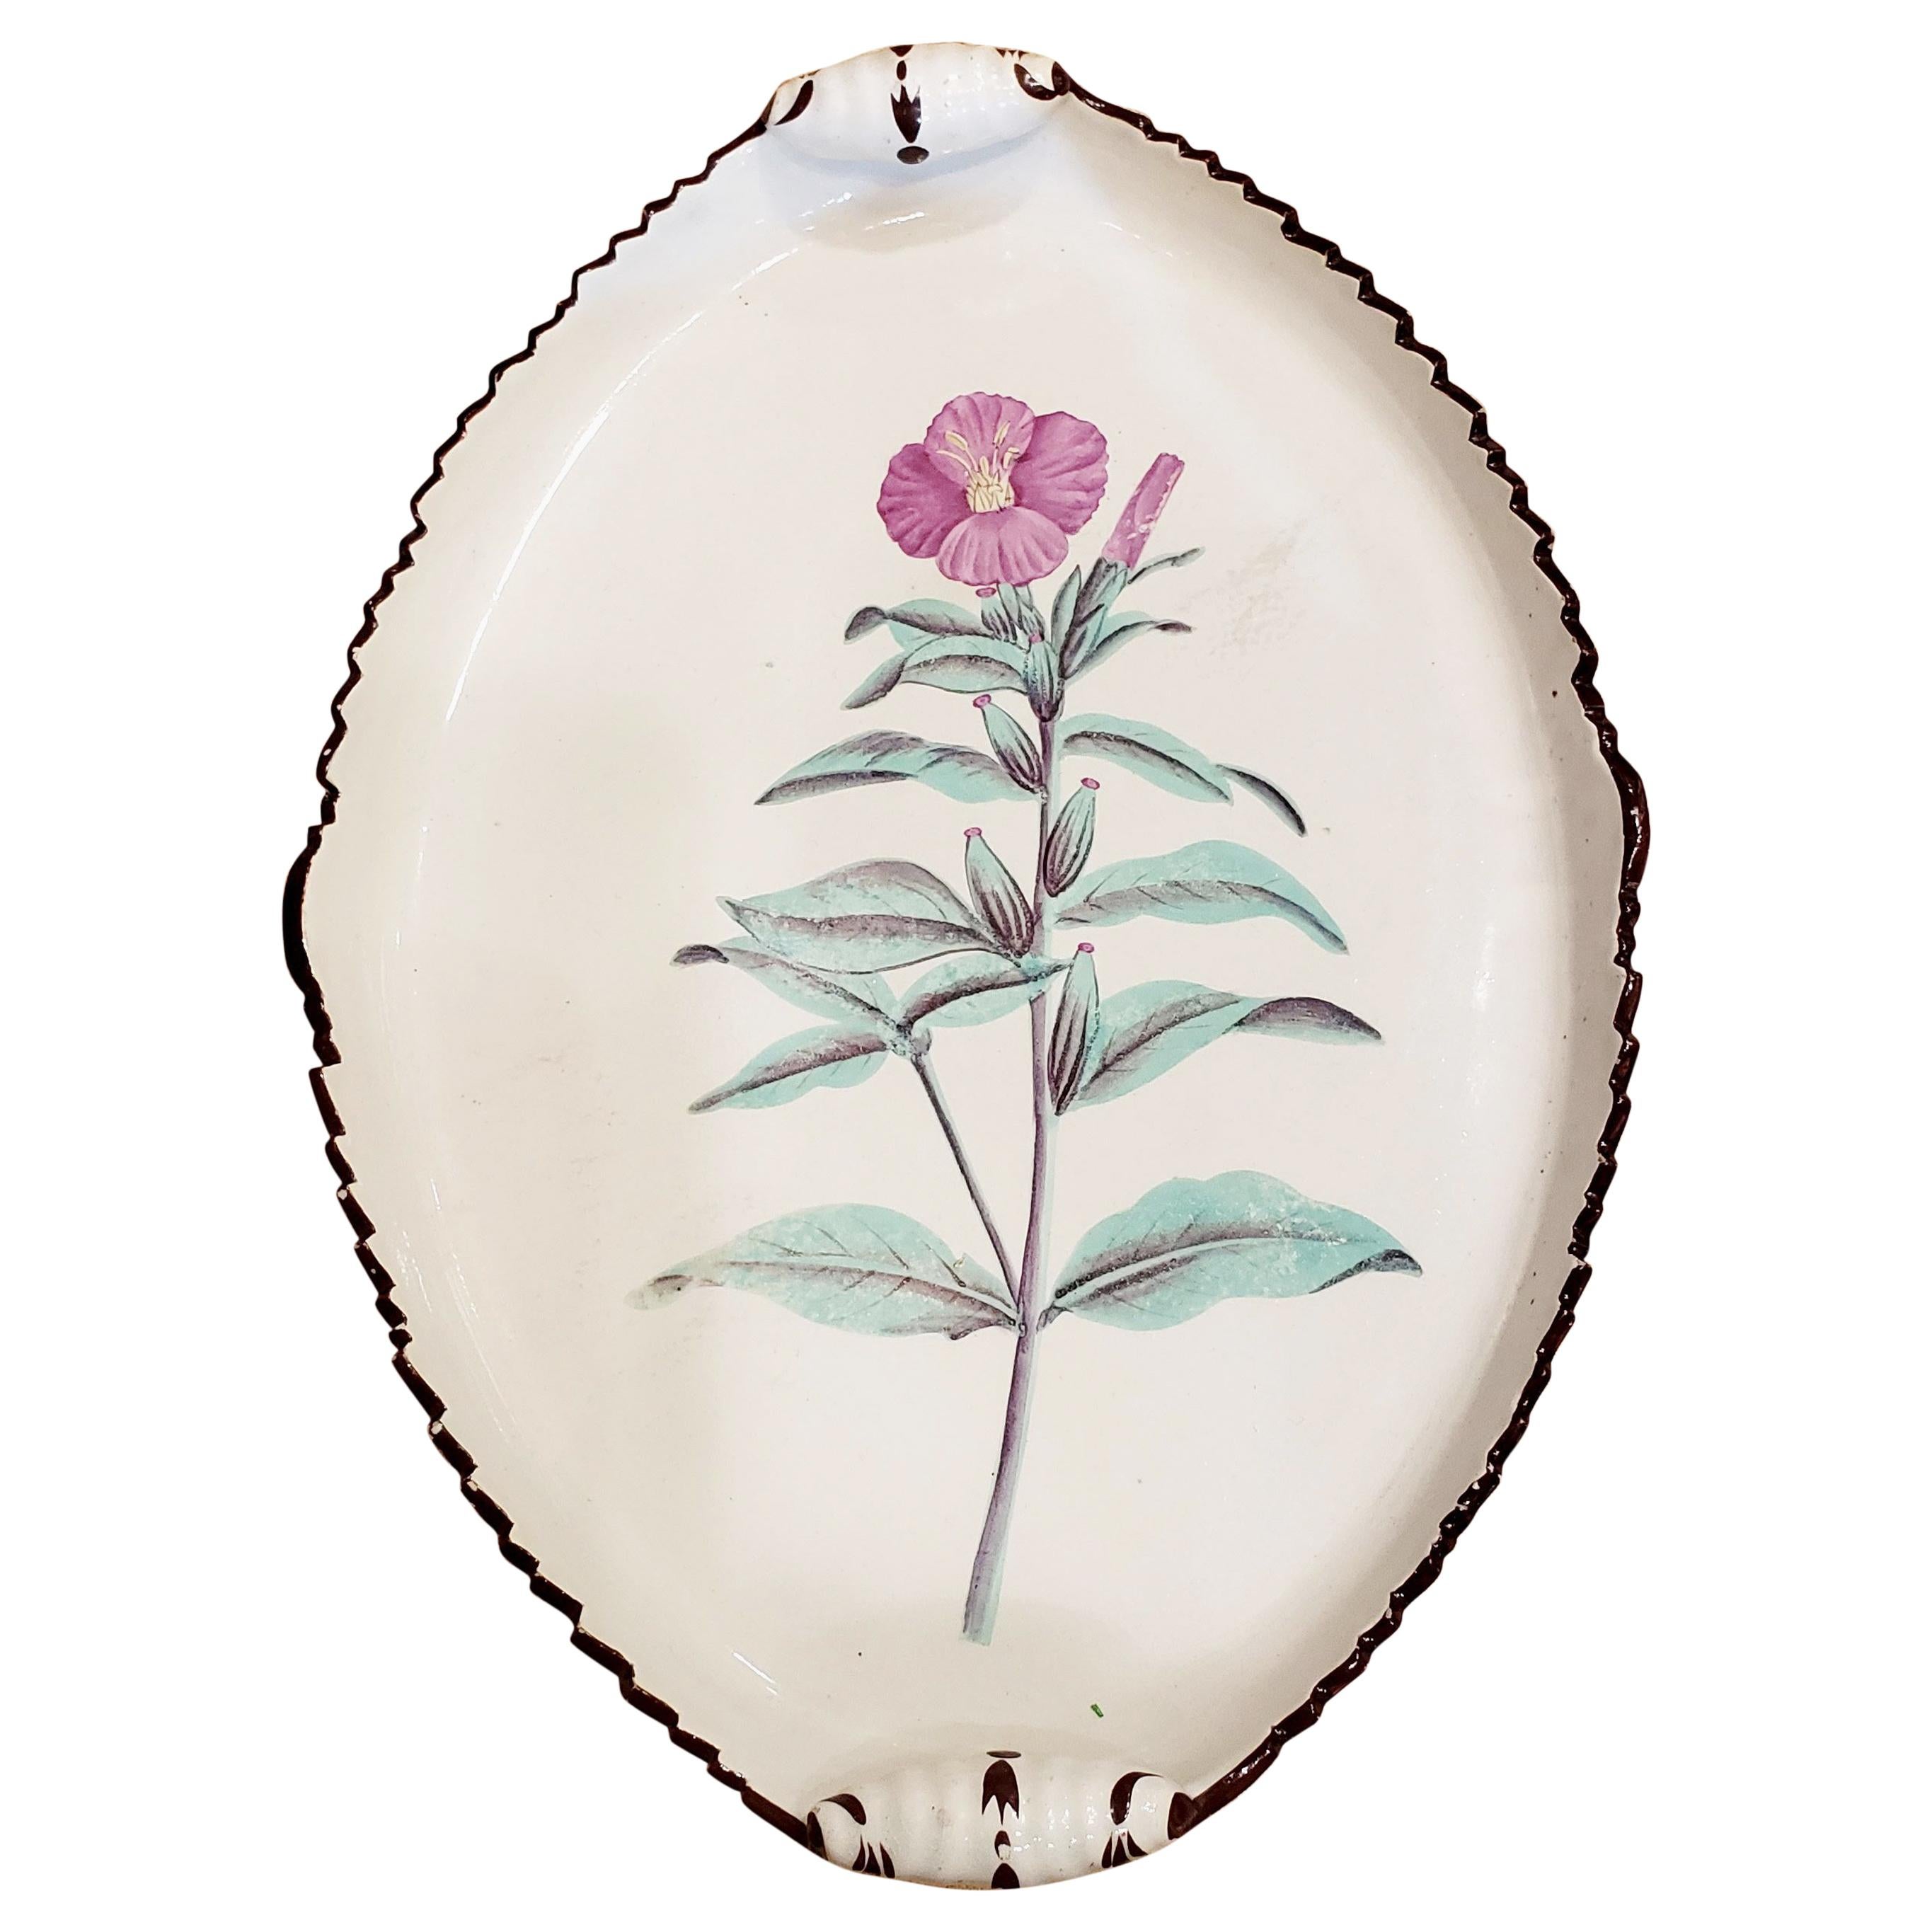 Davenport Creamware Shaped Tray with Botanical Specimen, a Purple Coherent